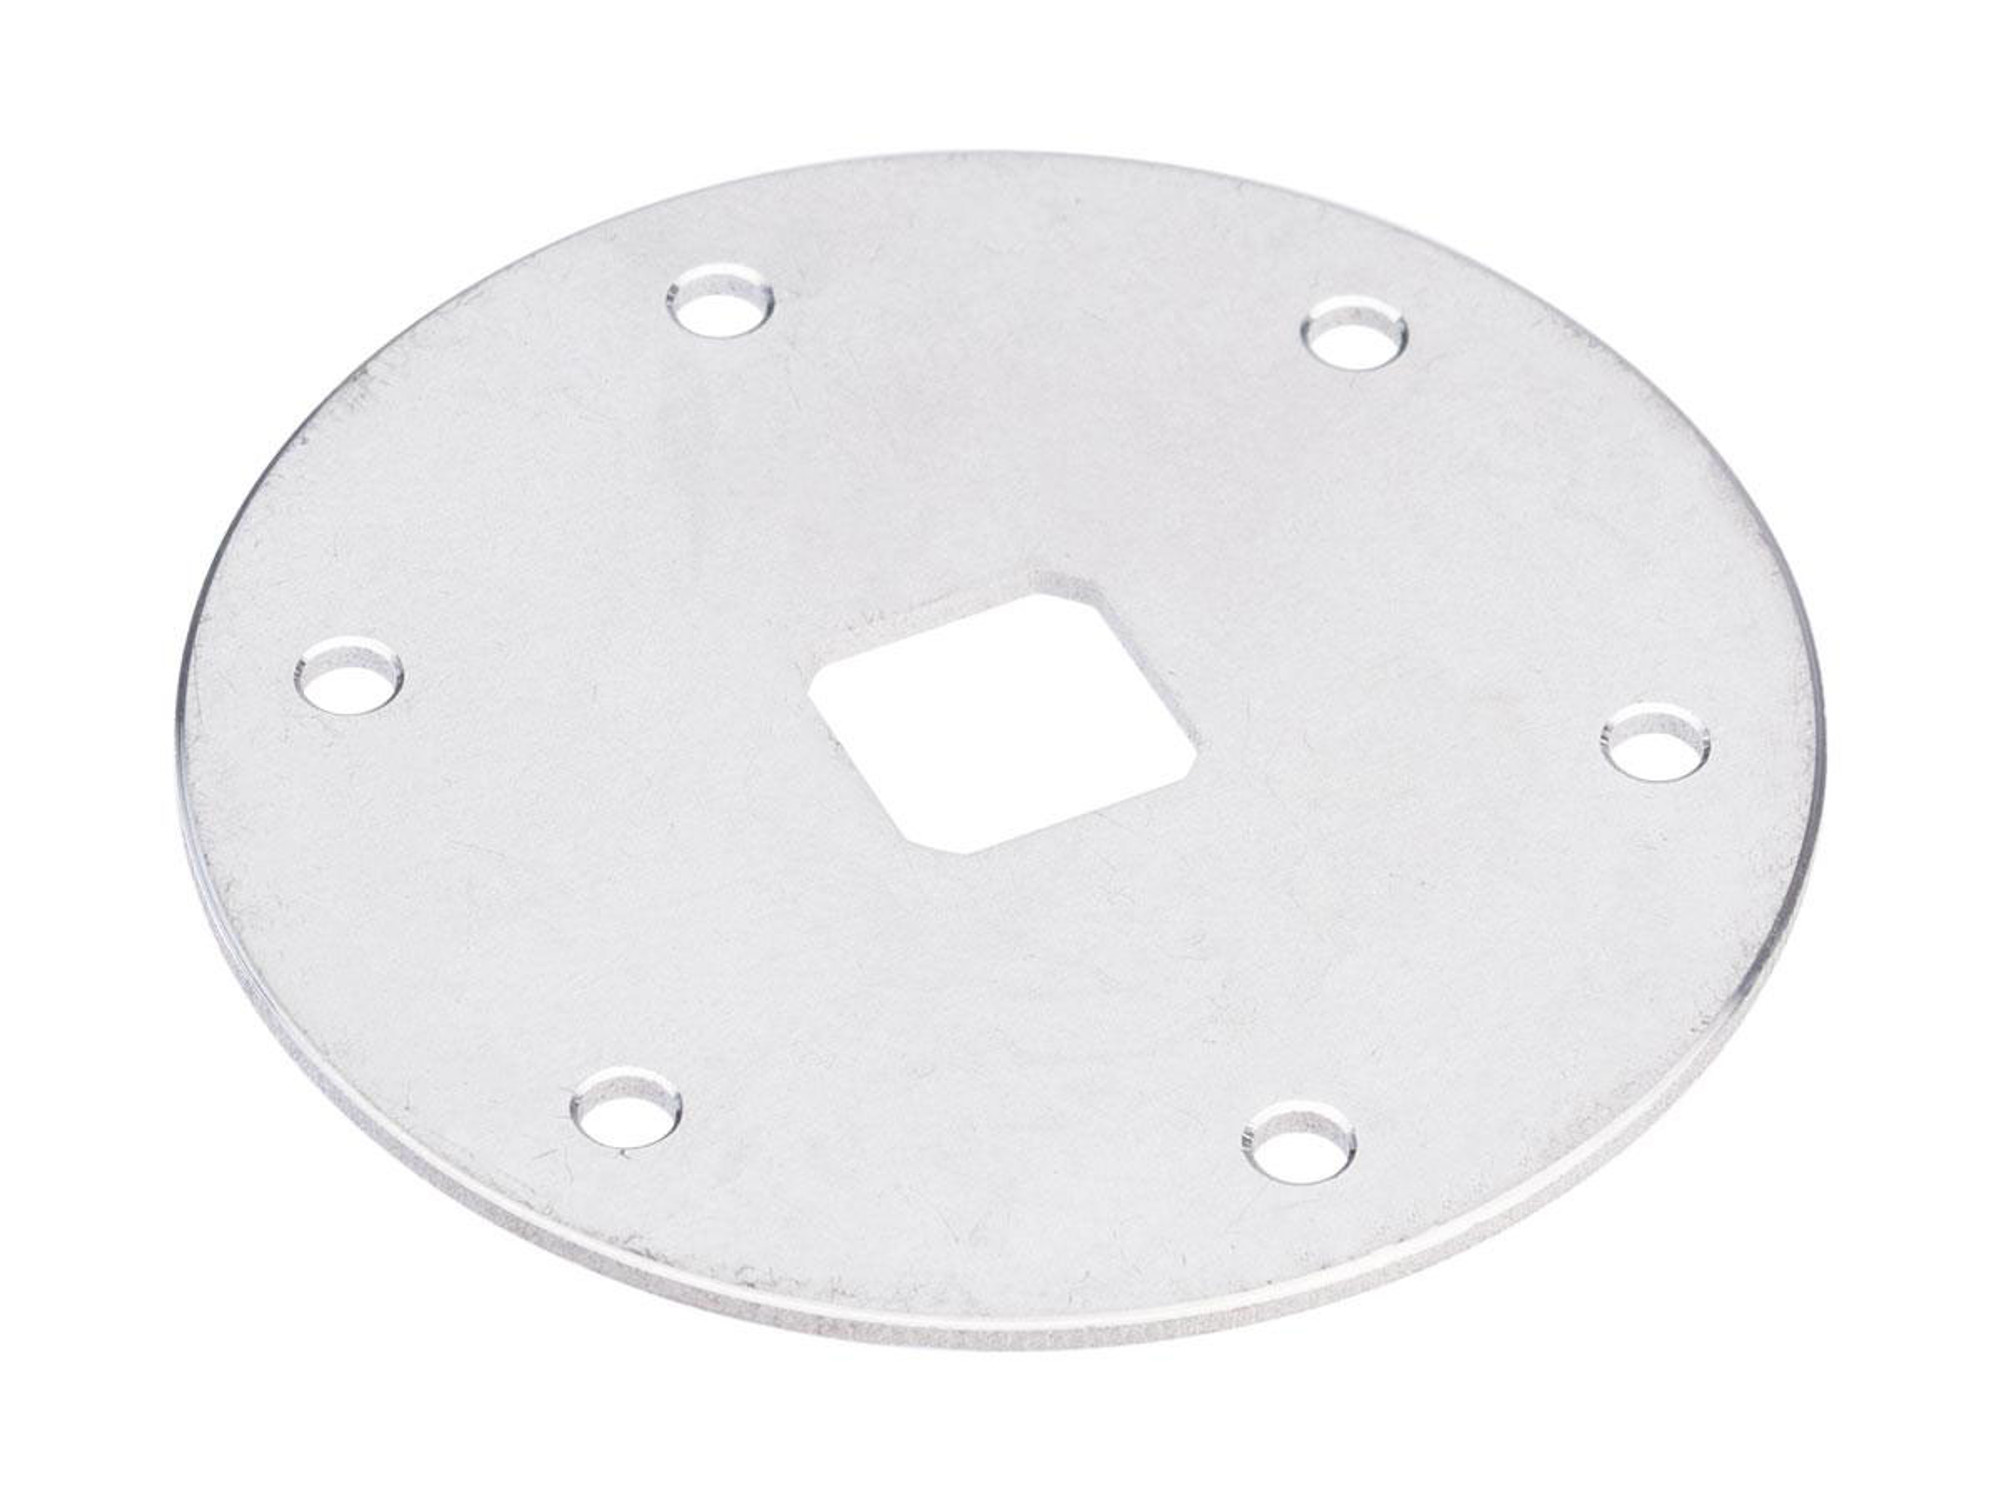 Jigging Master Reel Replacement Parts (Part: #61 / Rear Drag Plate)